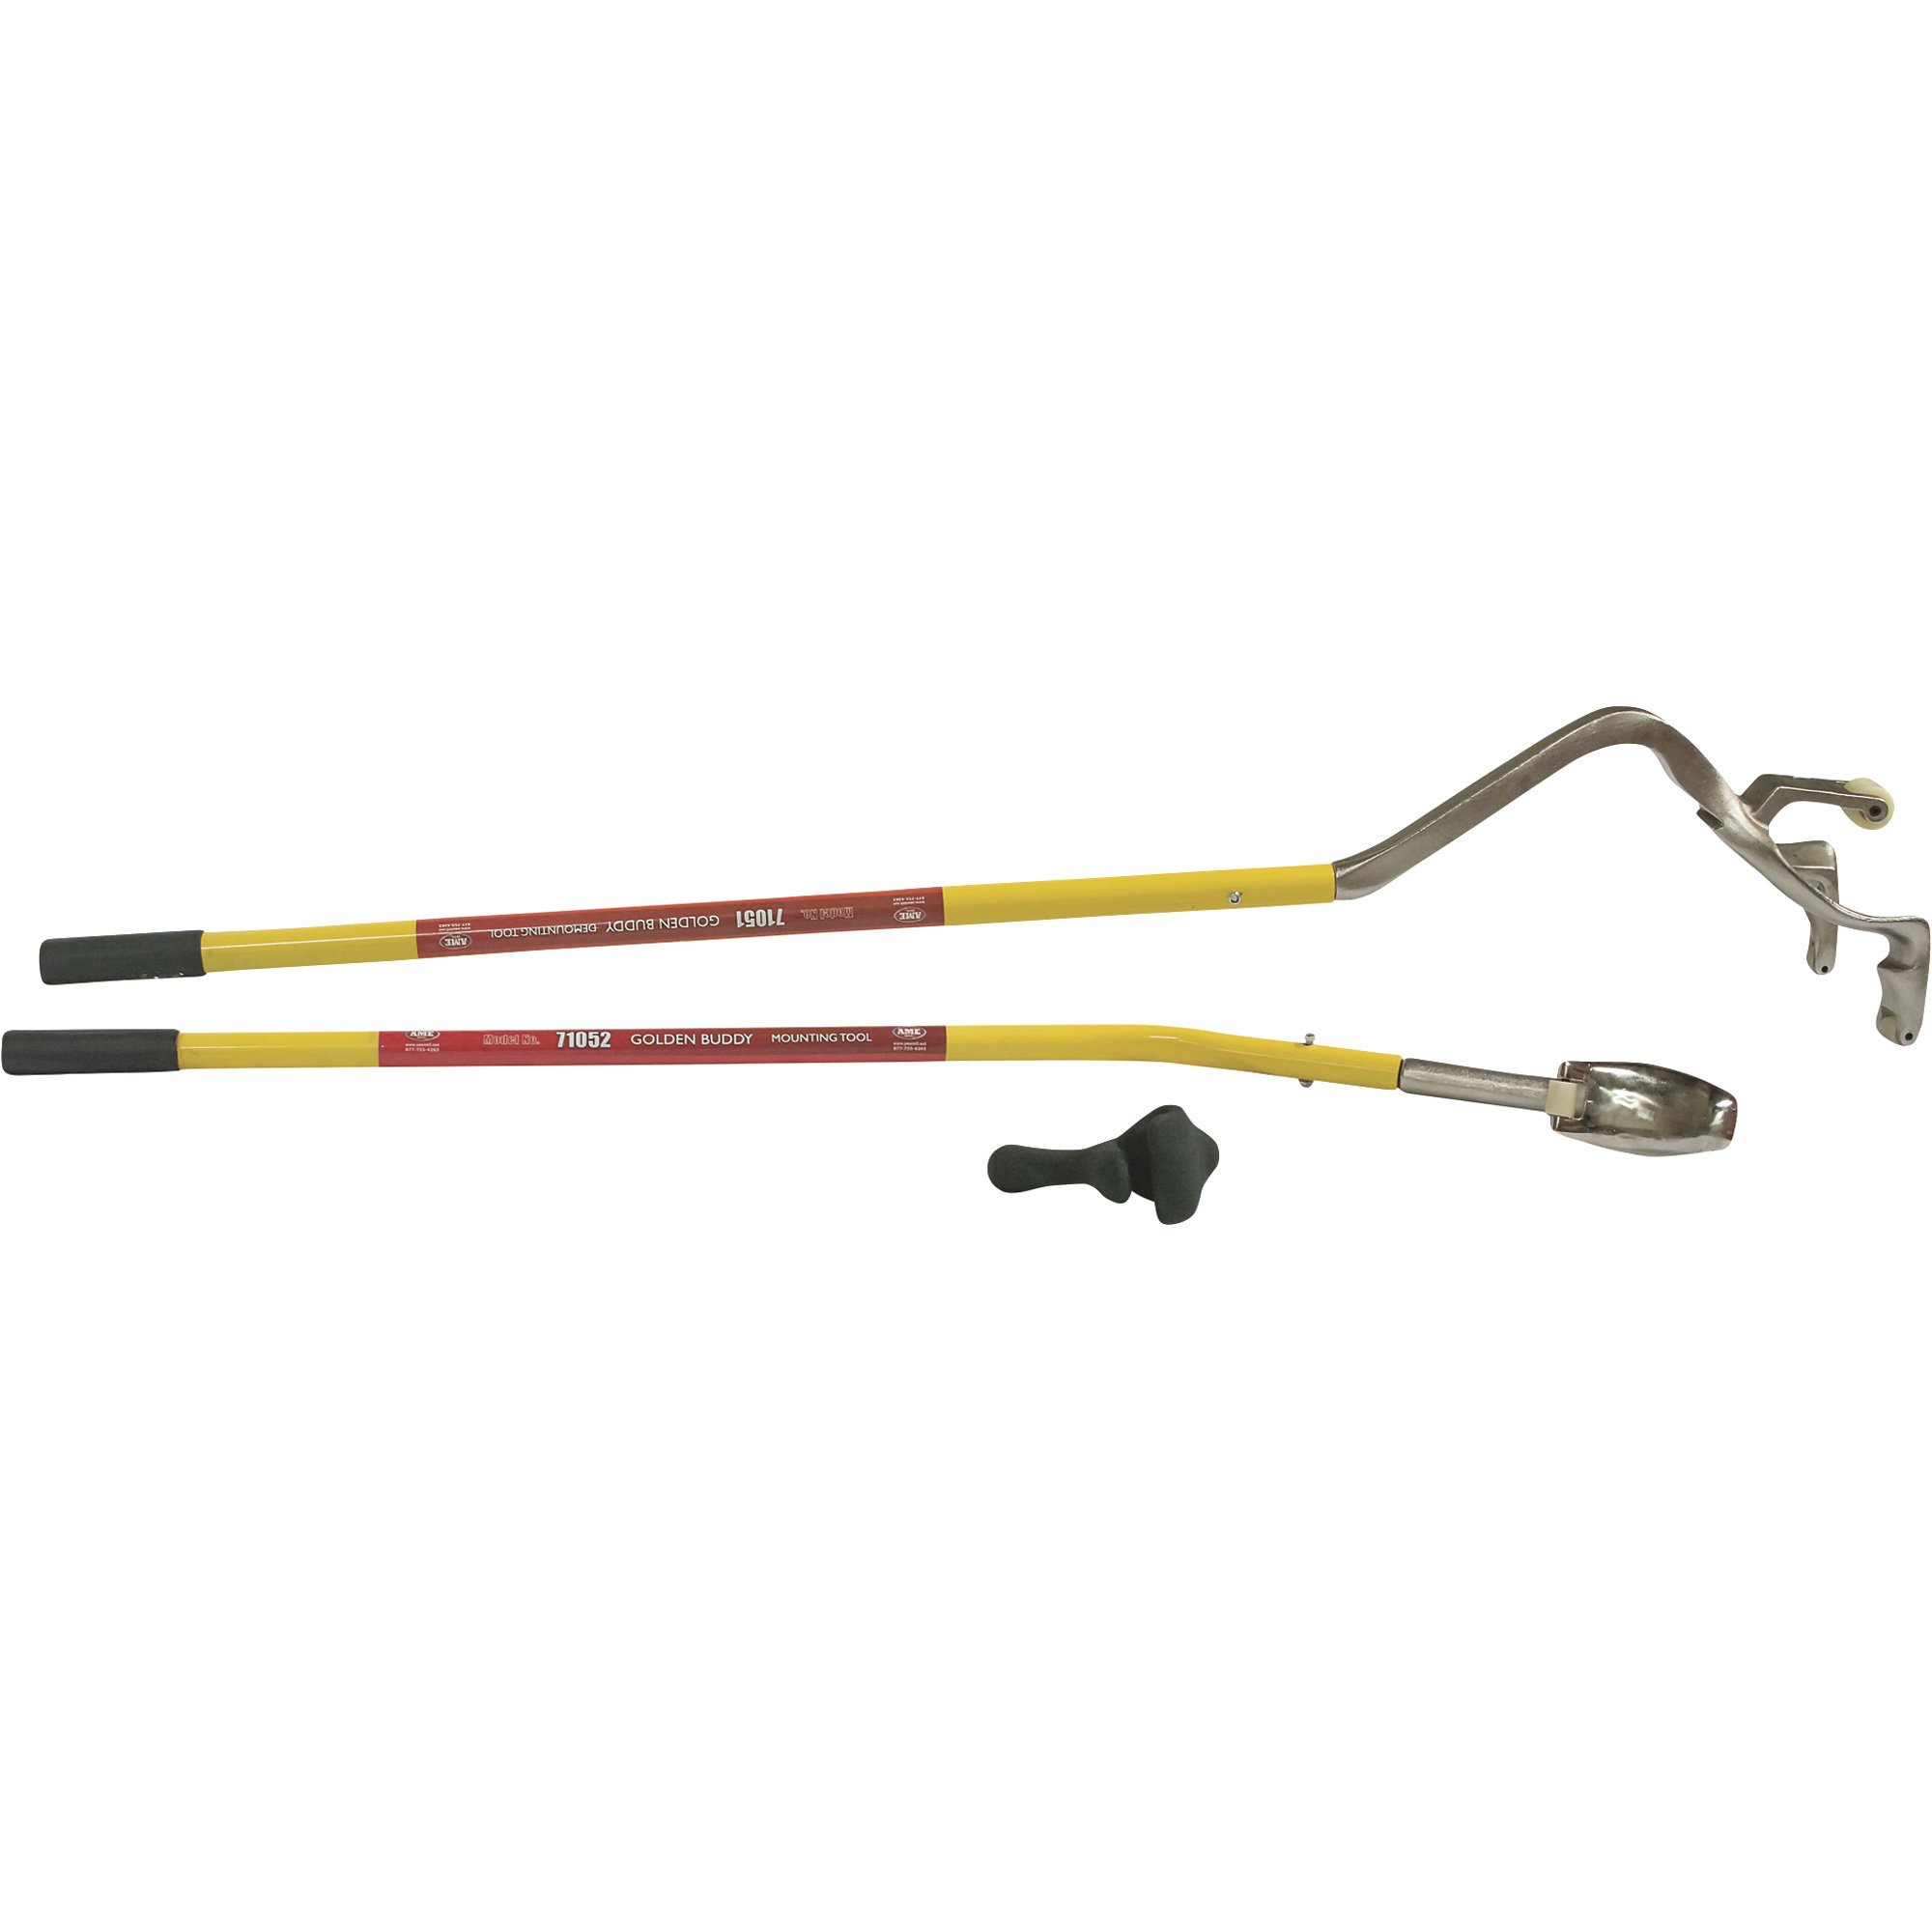 Golden Buddy Tire Changing System â Model 71050